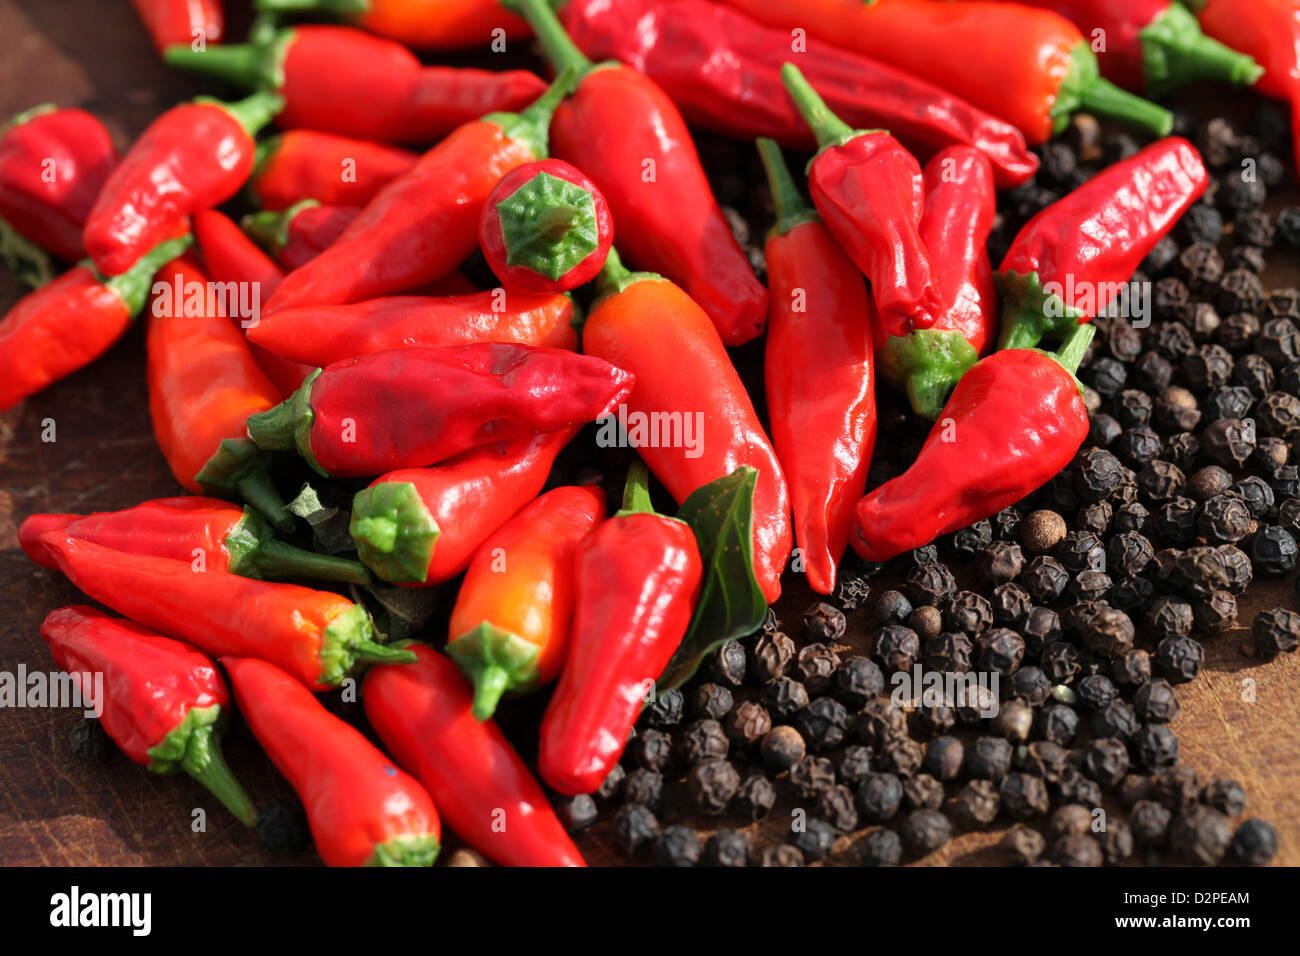 A pile of fresh red Chili peppers and black peppercorns Stock Photo